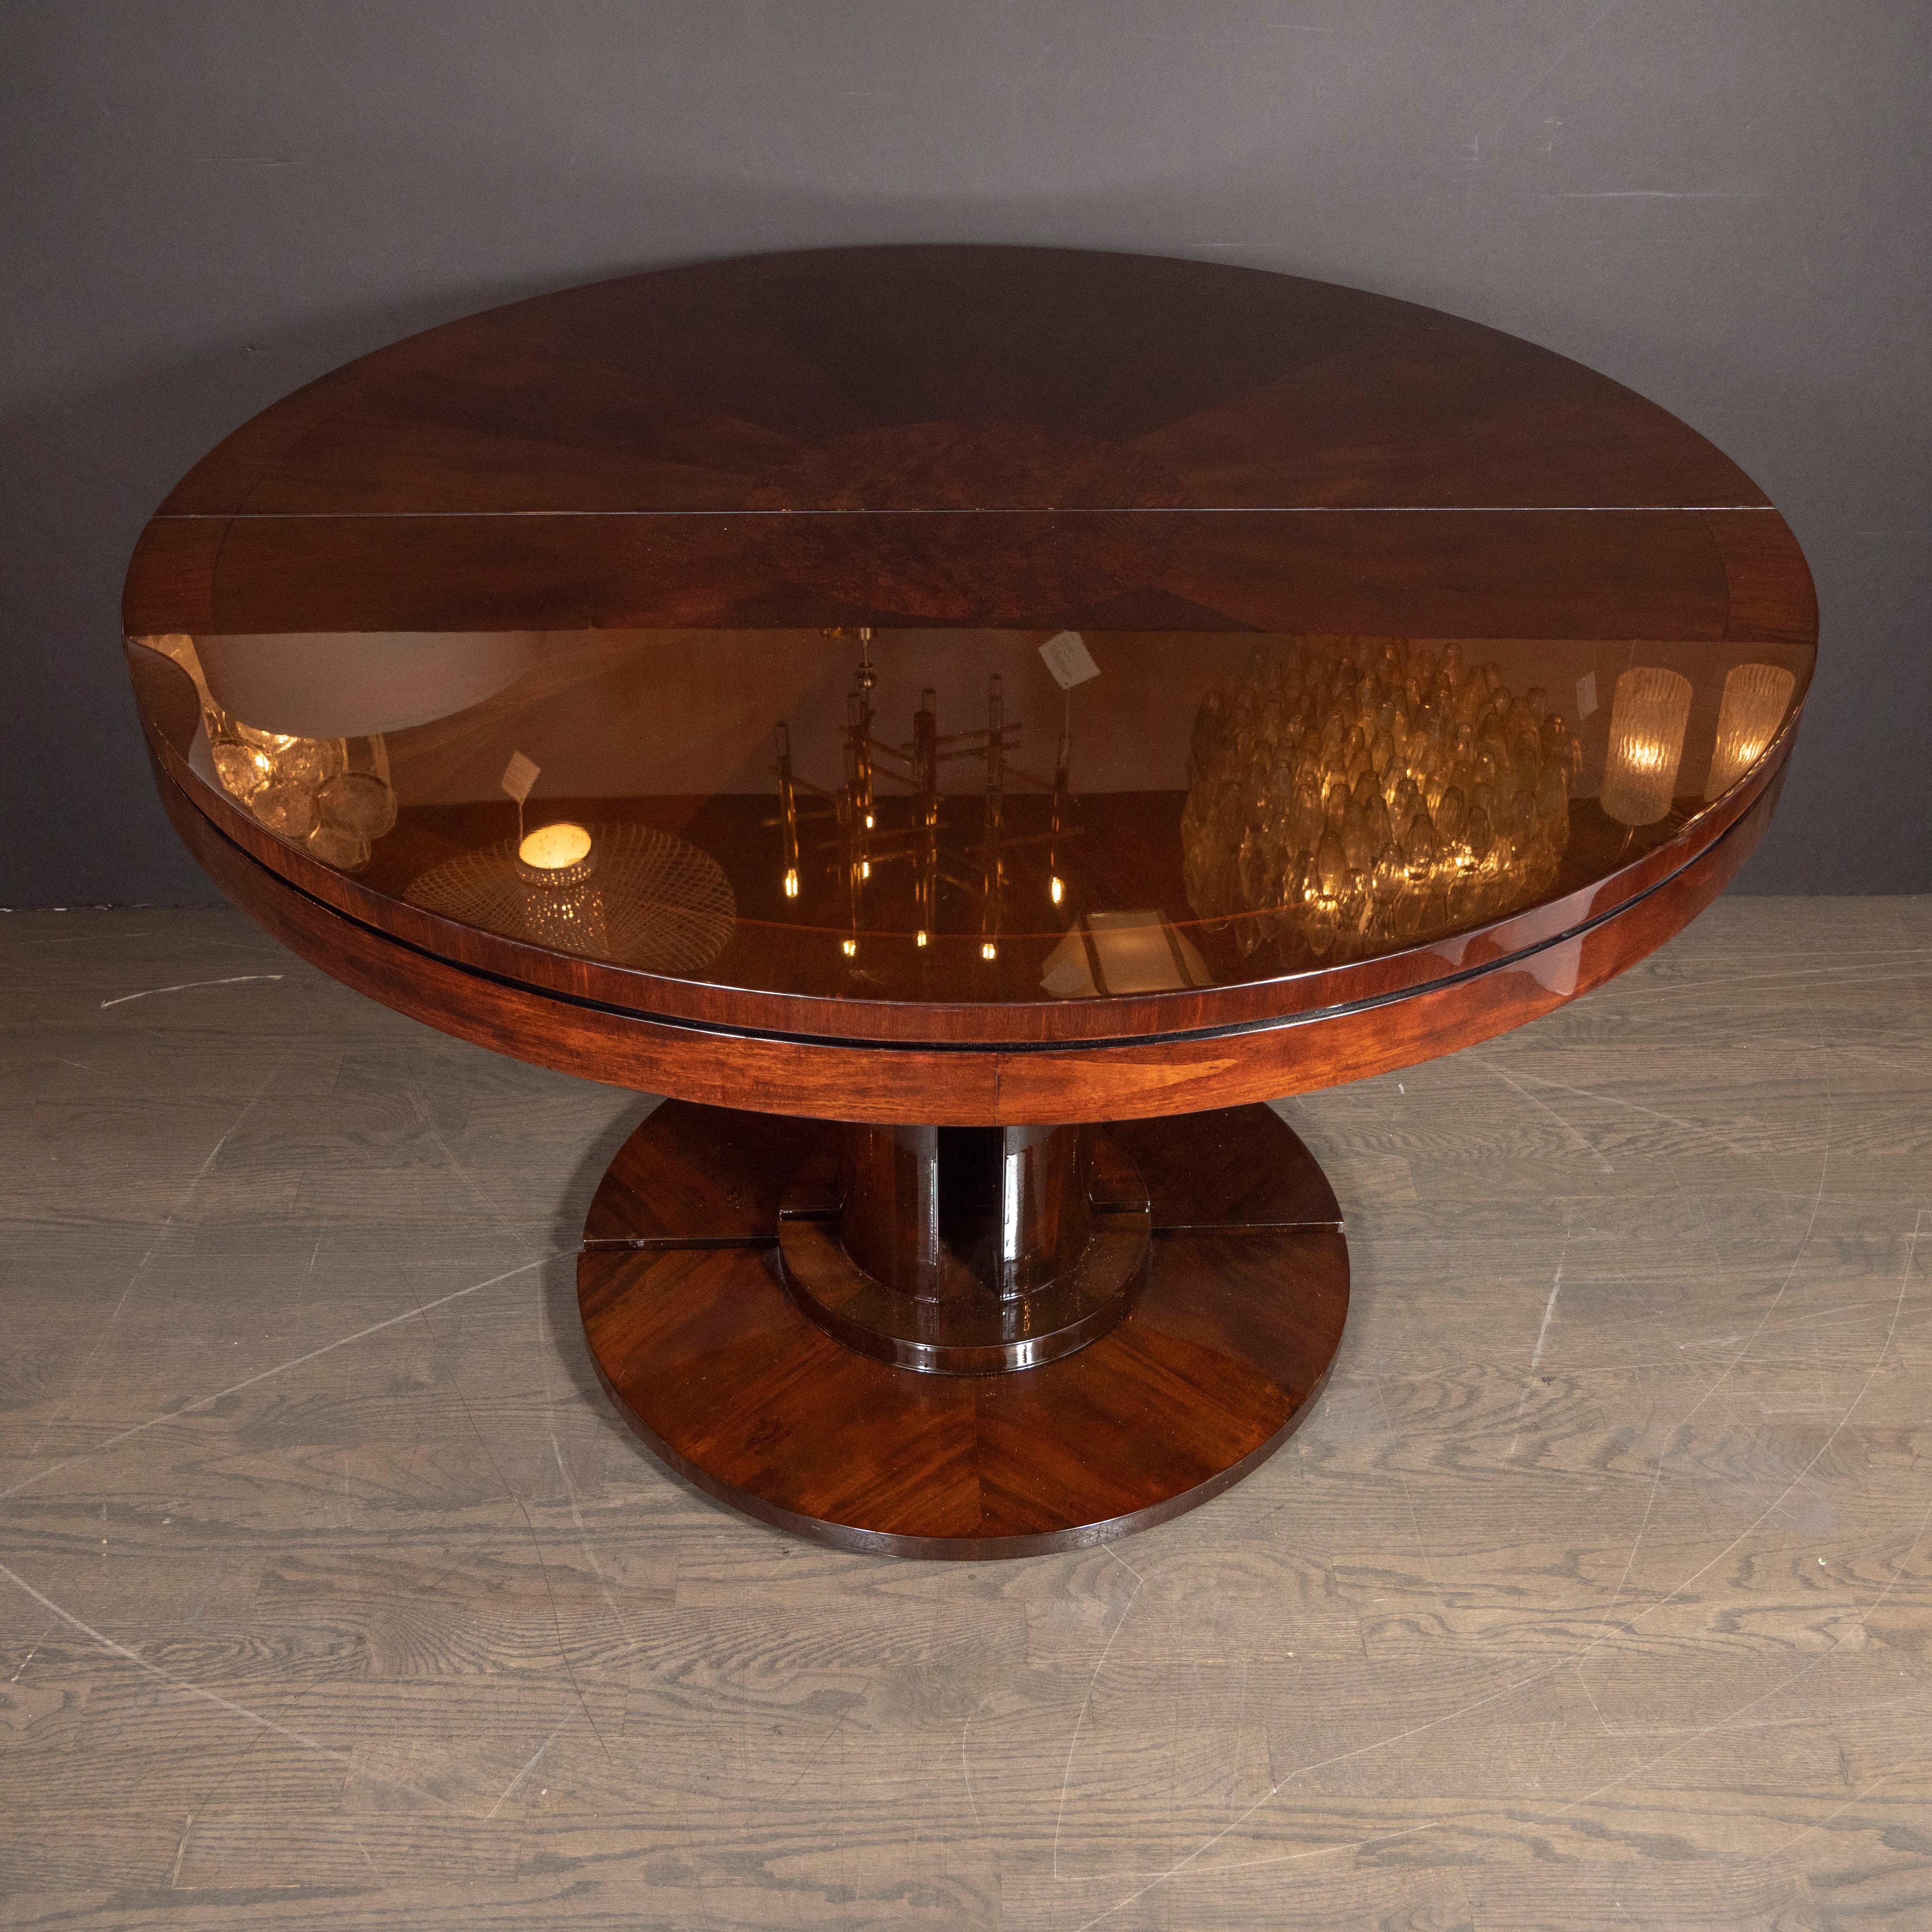 American Art Deco Streamlined Bookmatched & Burled Walnut Dining/Center Table